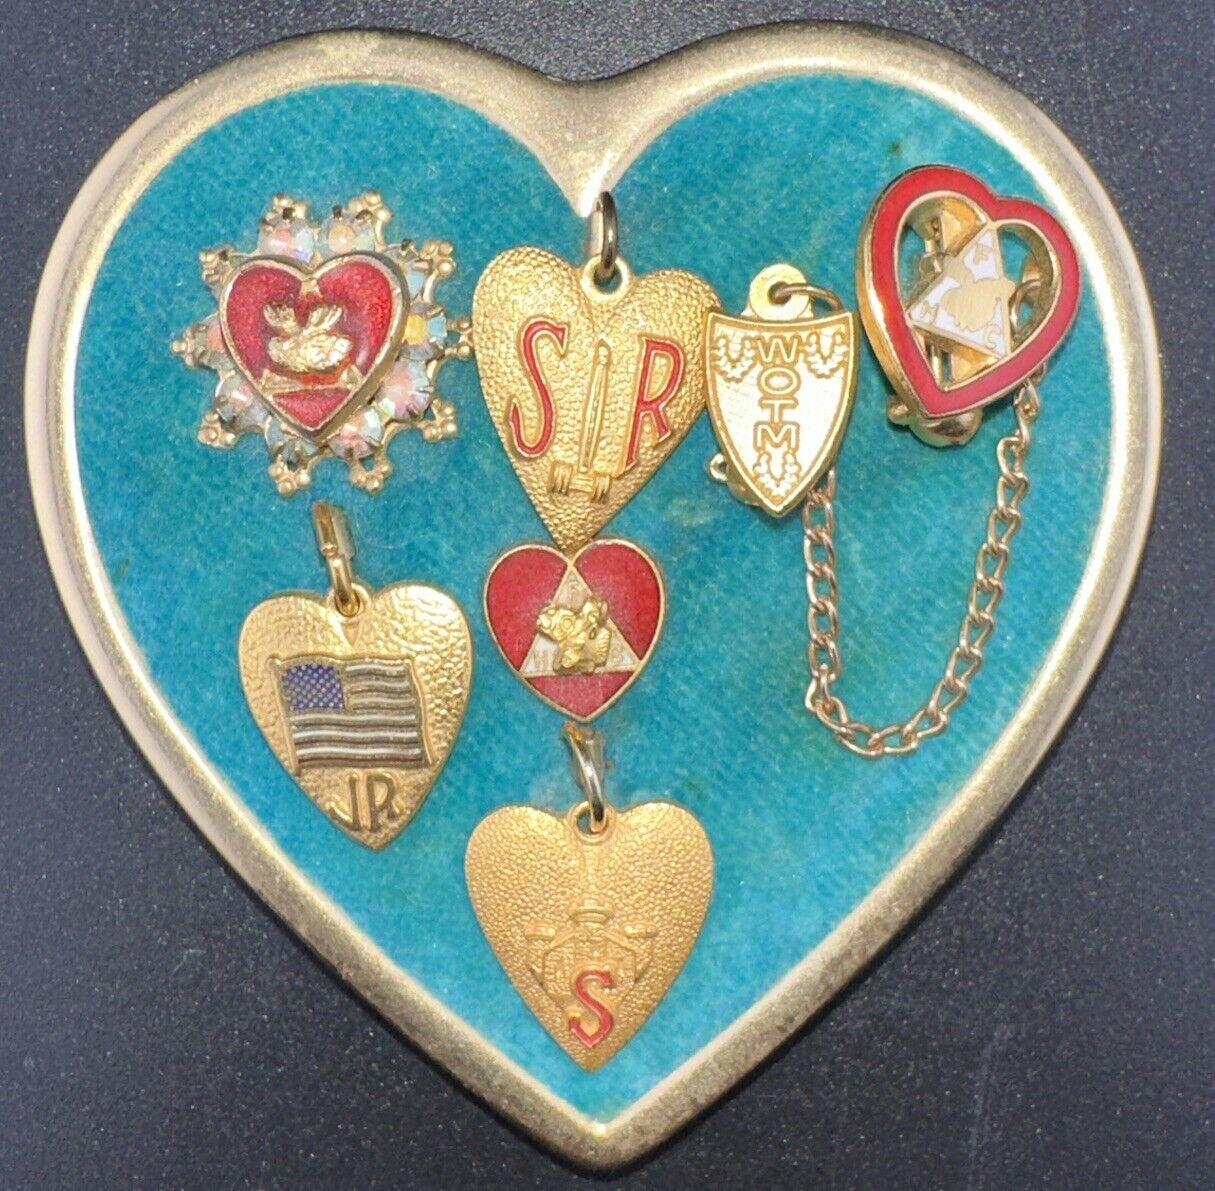 Vintage Women Of The Moose Club Velvet Heart Award Pin With 6 Pins